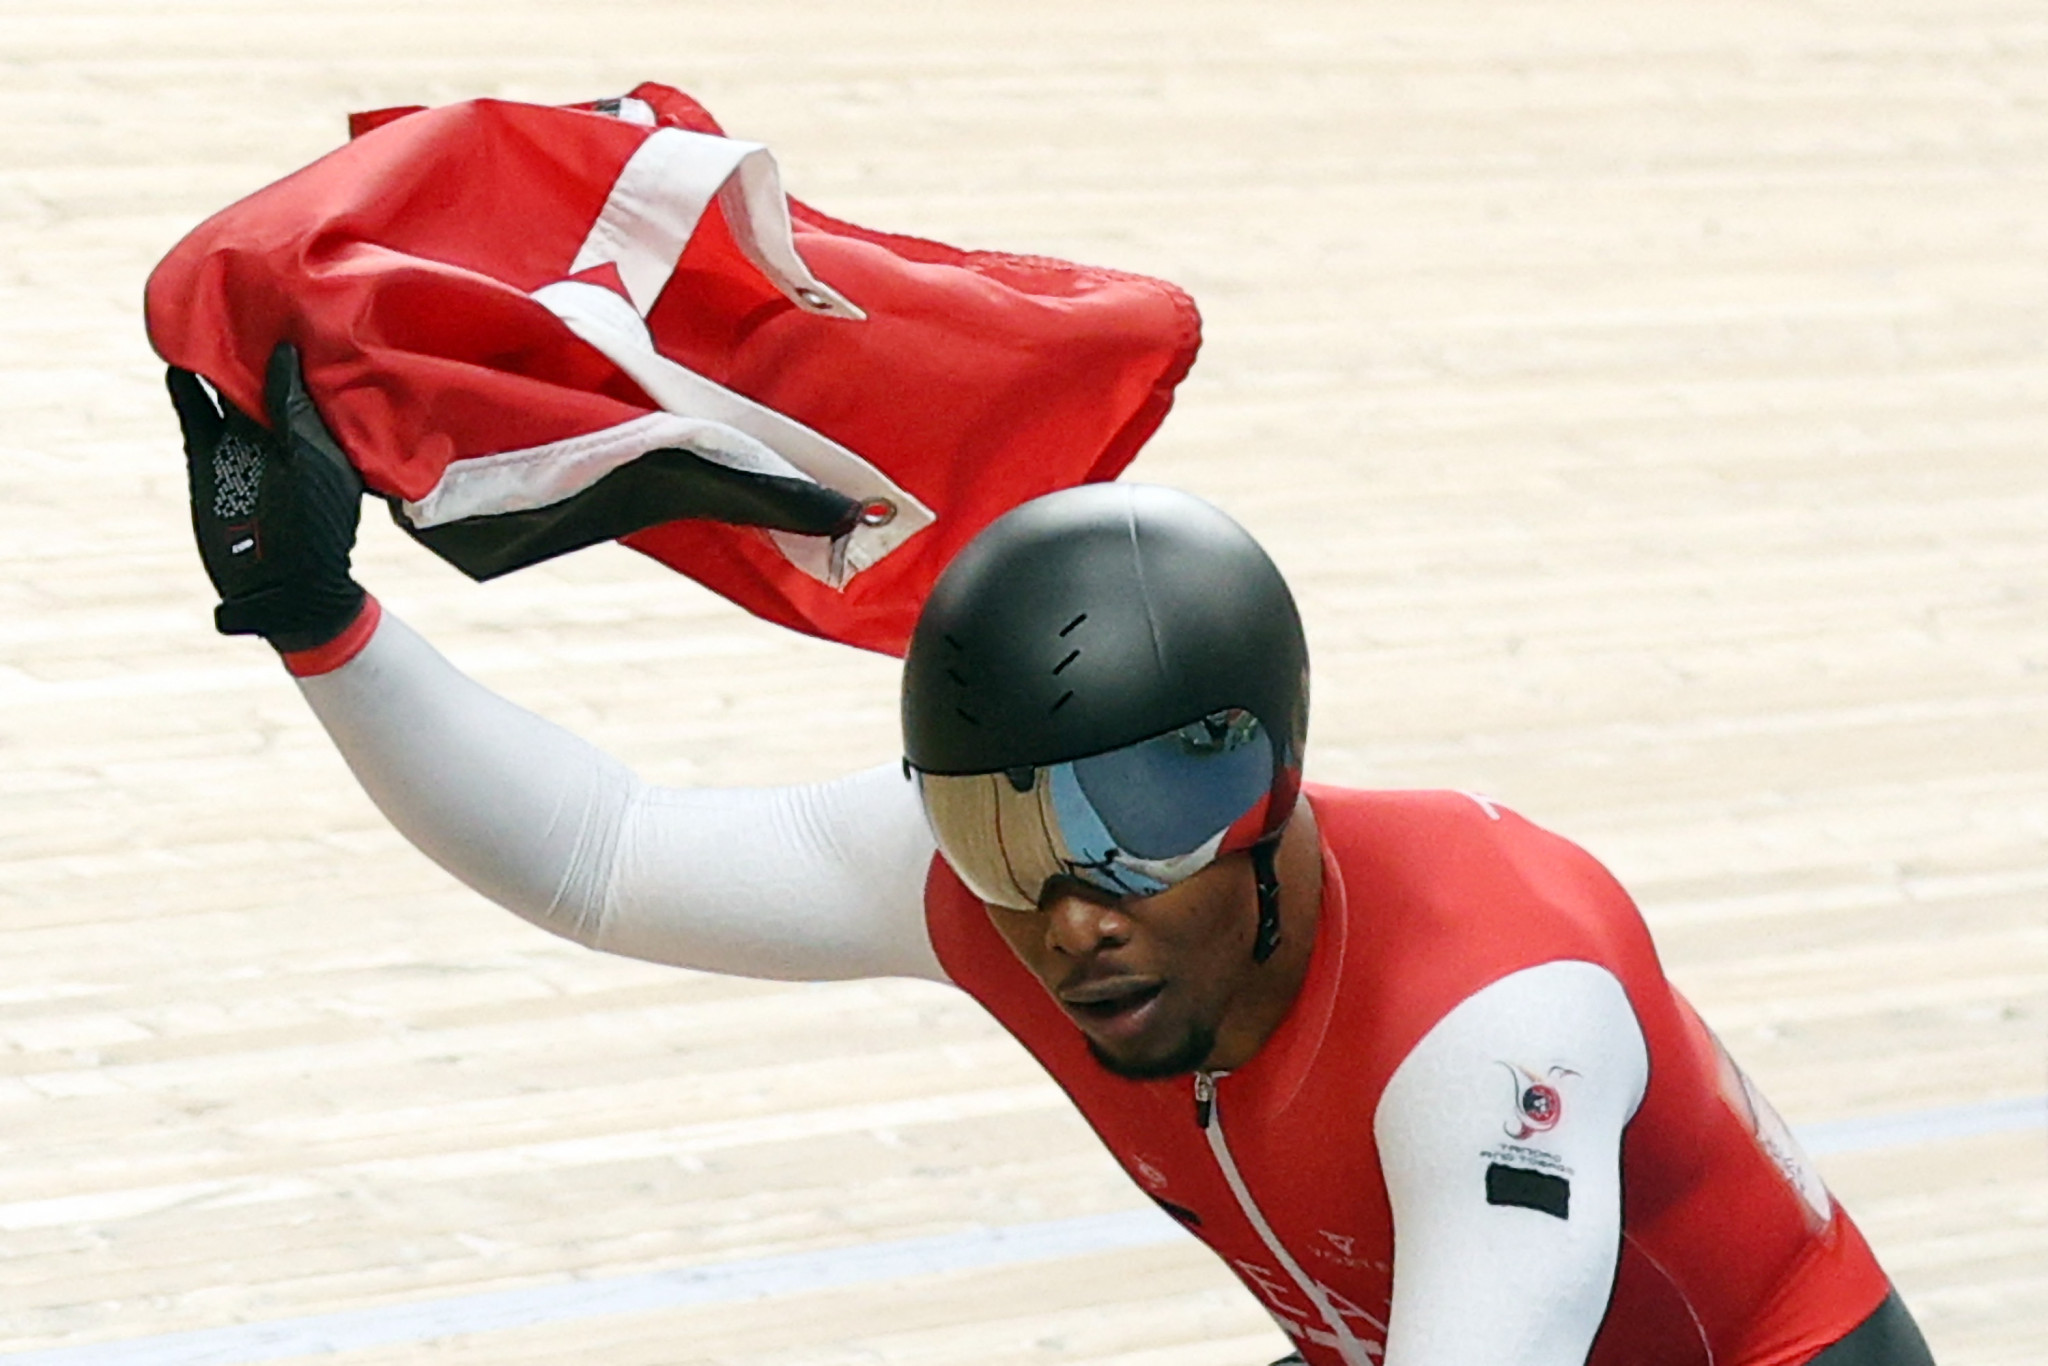 Paul wins first Trinidad and Tobago cycling gold in 56 years at Birmingham 2022